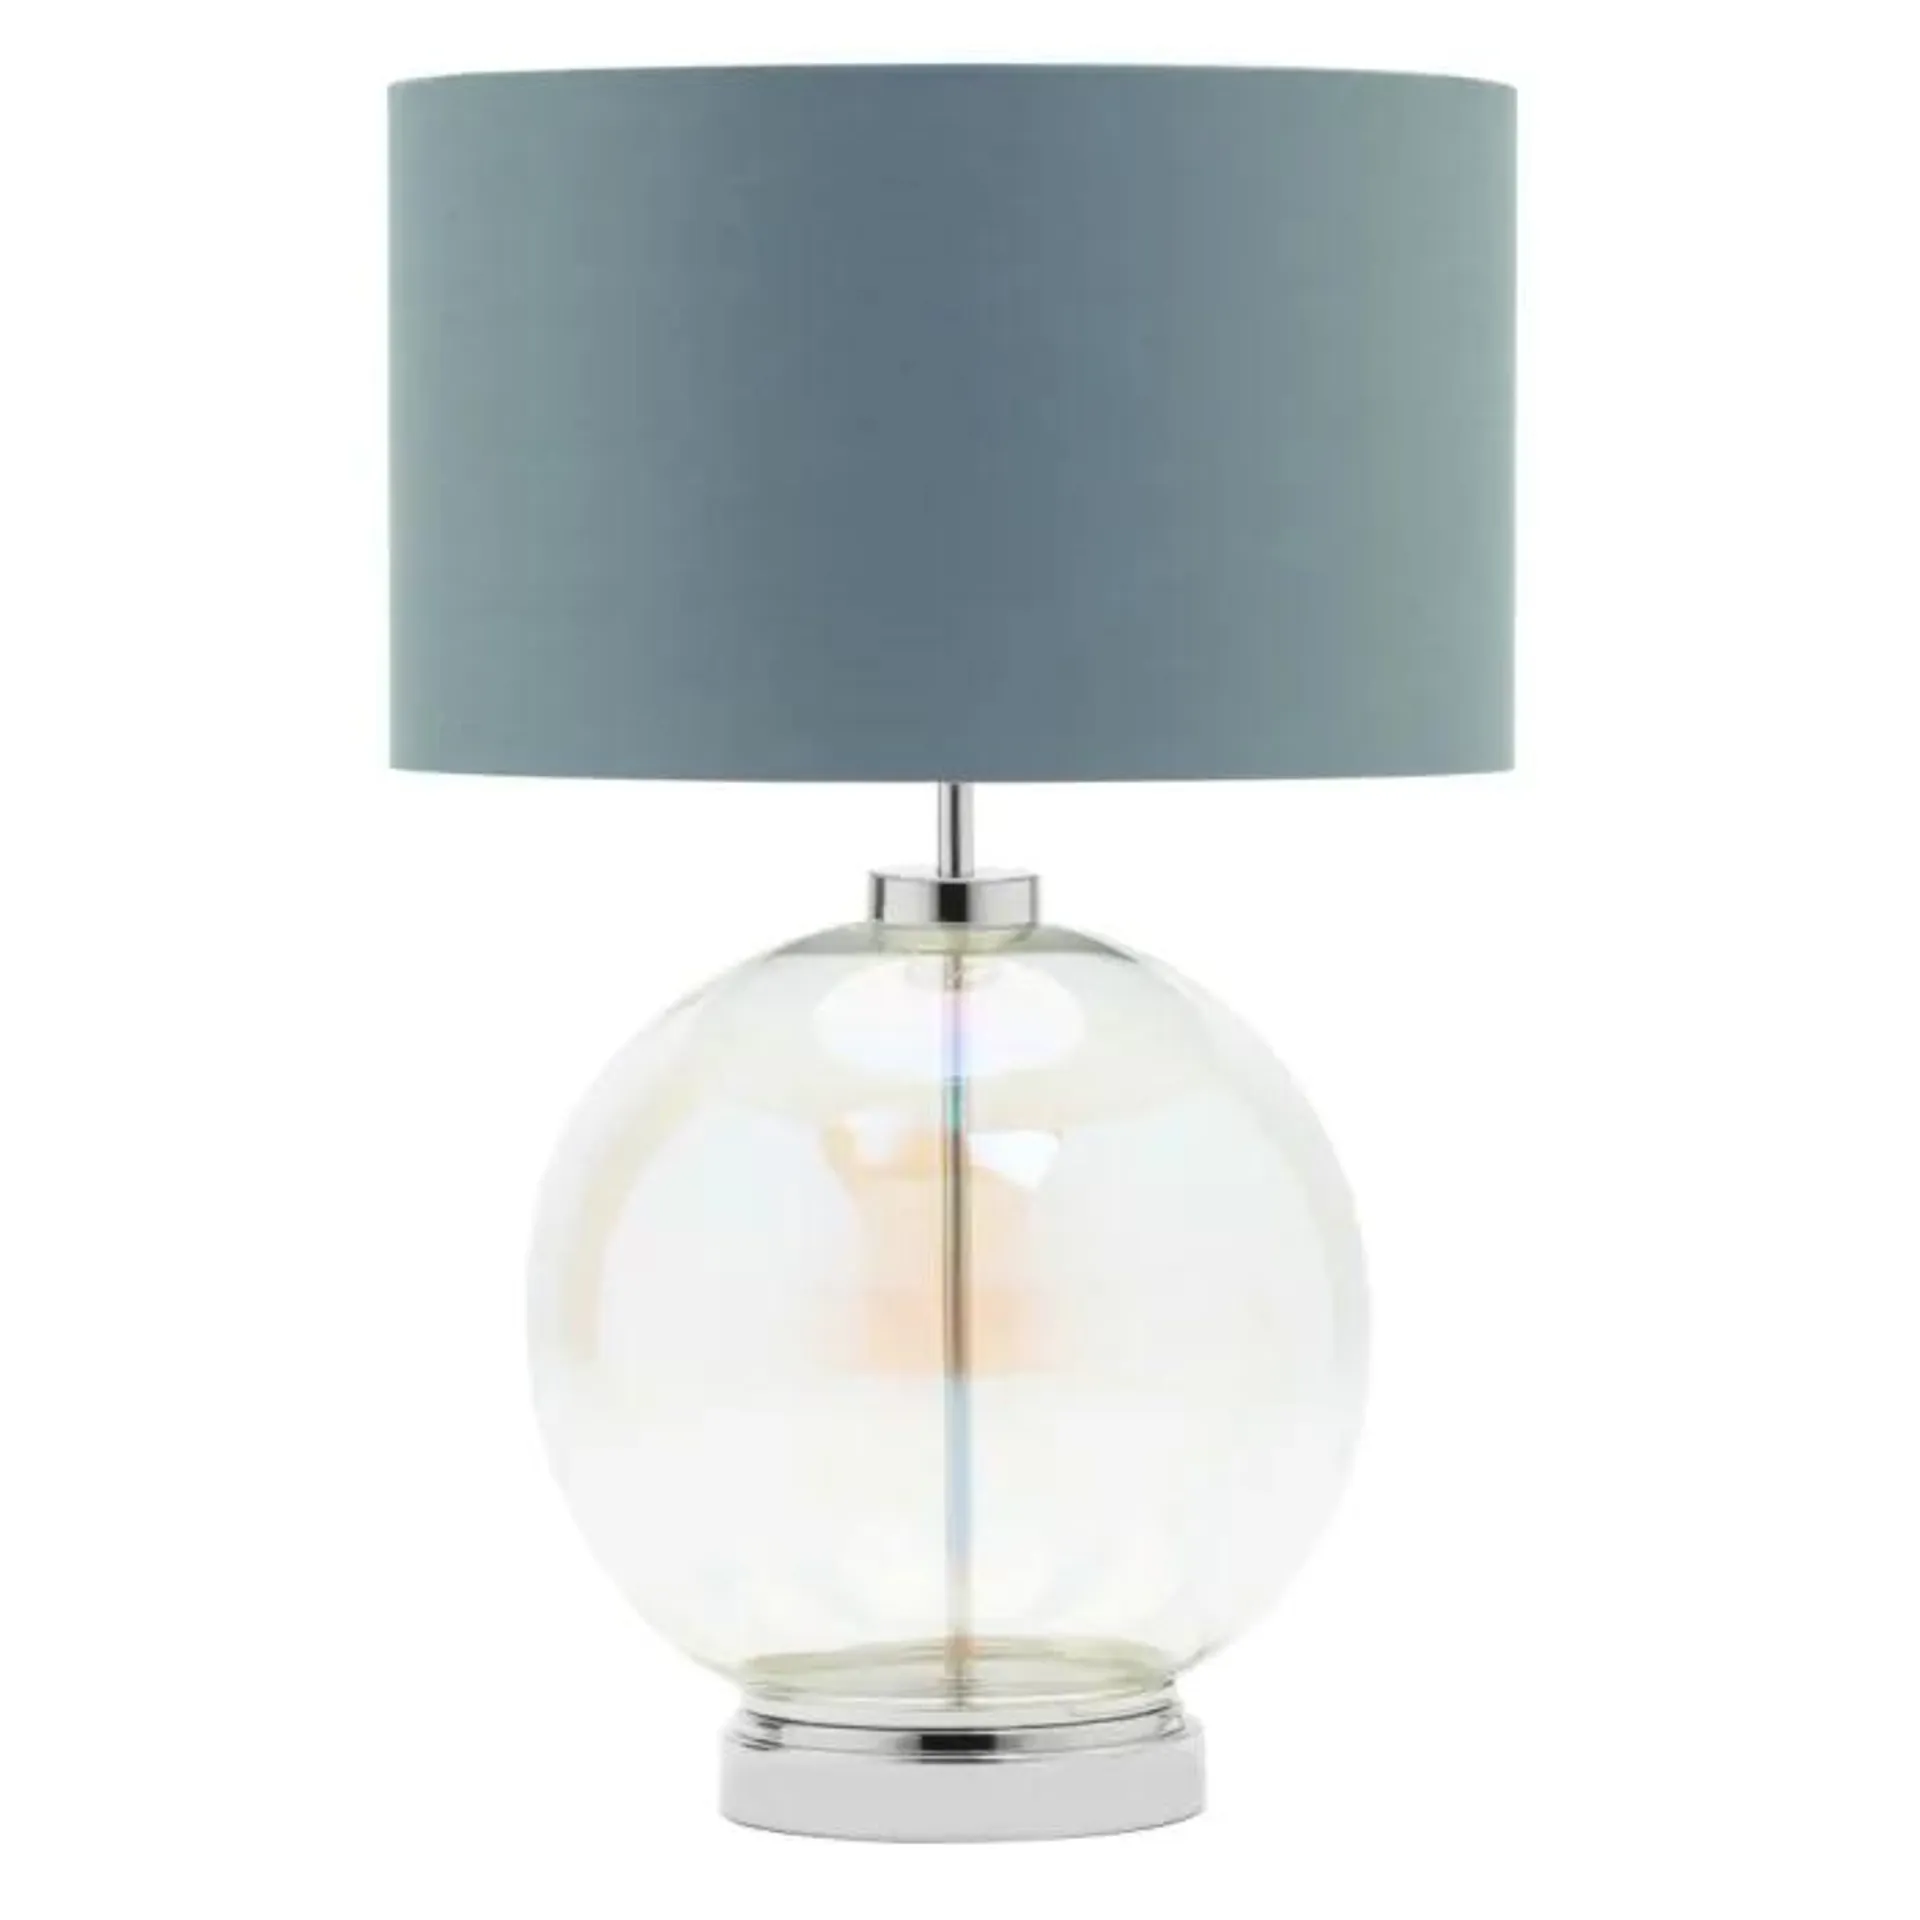 Metro Iridescent Glass Sphere Table Lamp, Nickel and Grey